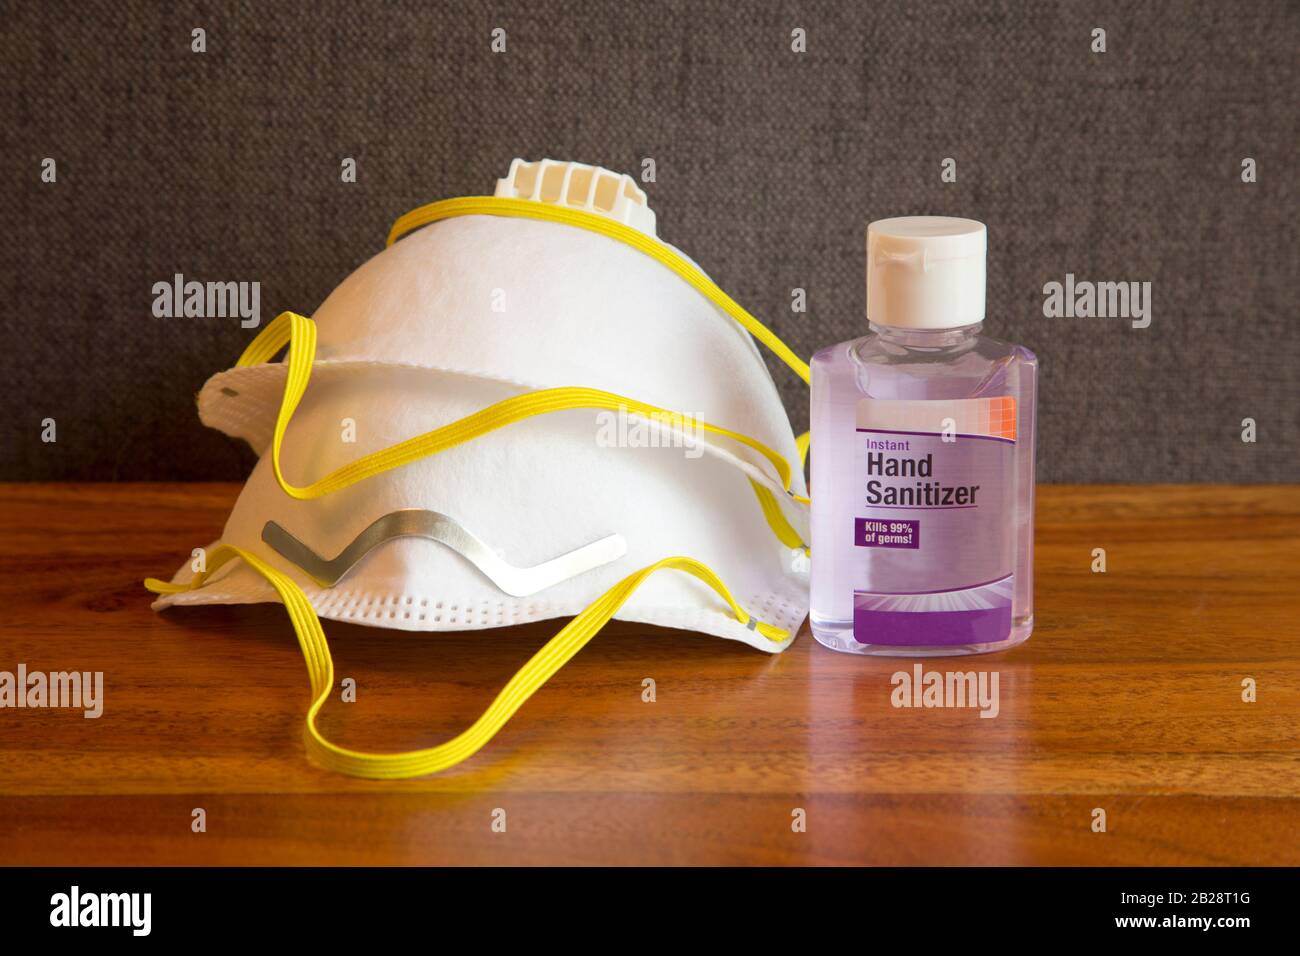 Hand sanitizer and pair of face masks on home table with gray fabric background reflect personal protection supplies to guard against coronavirus pand Stock Photo